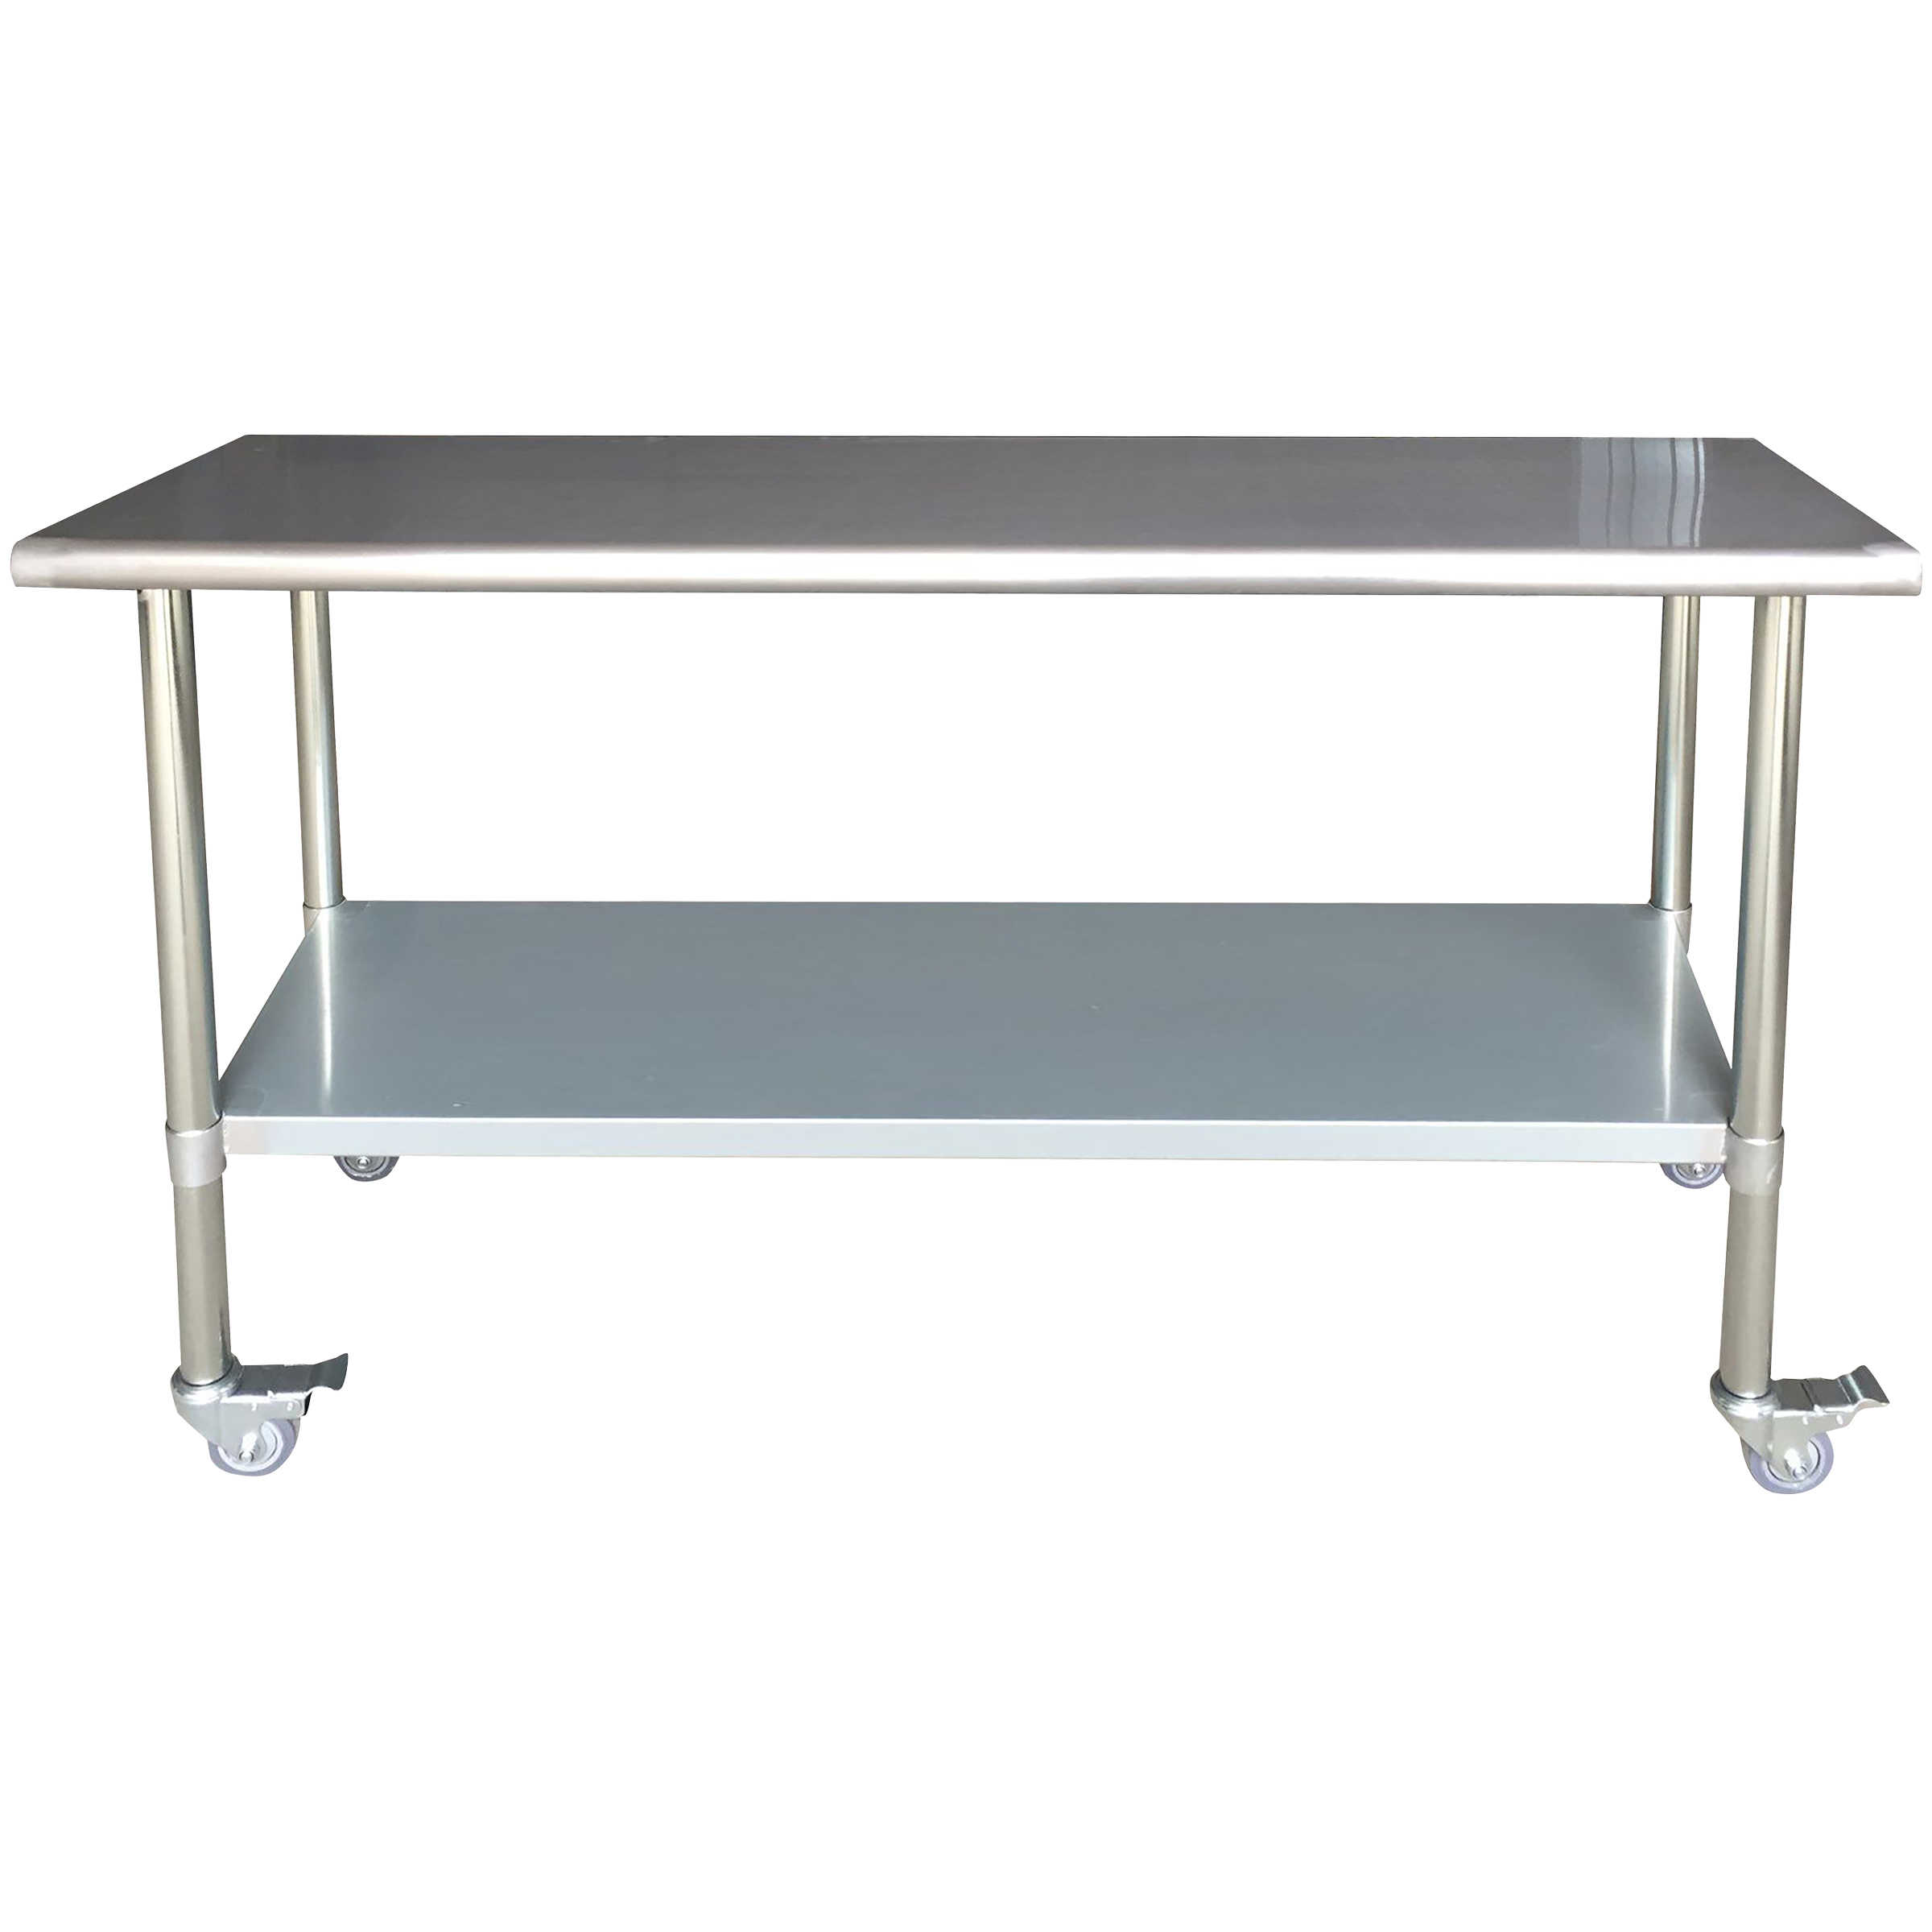 Sportsman Series Stainless Steel Work Table with Casters 24 x 72 Inches